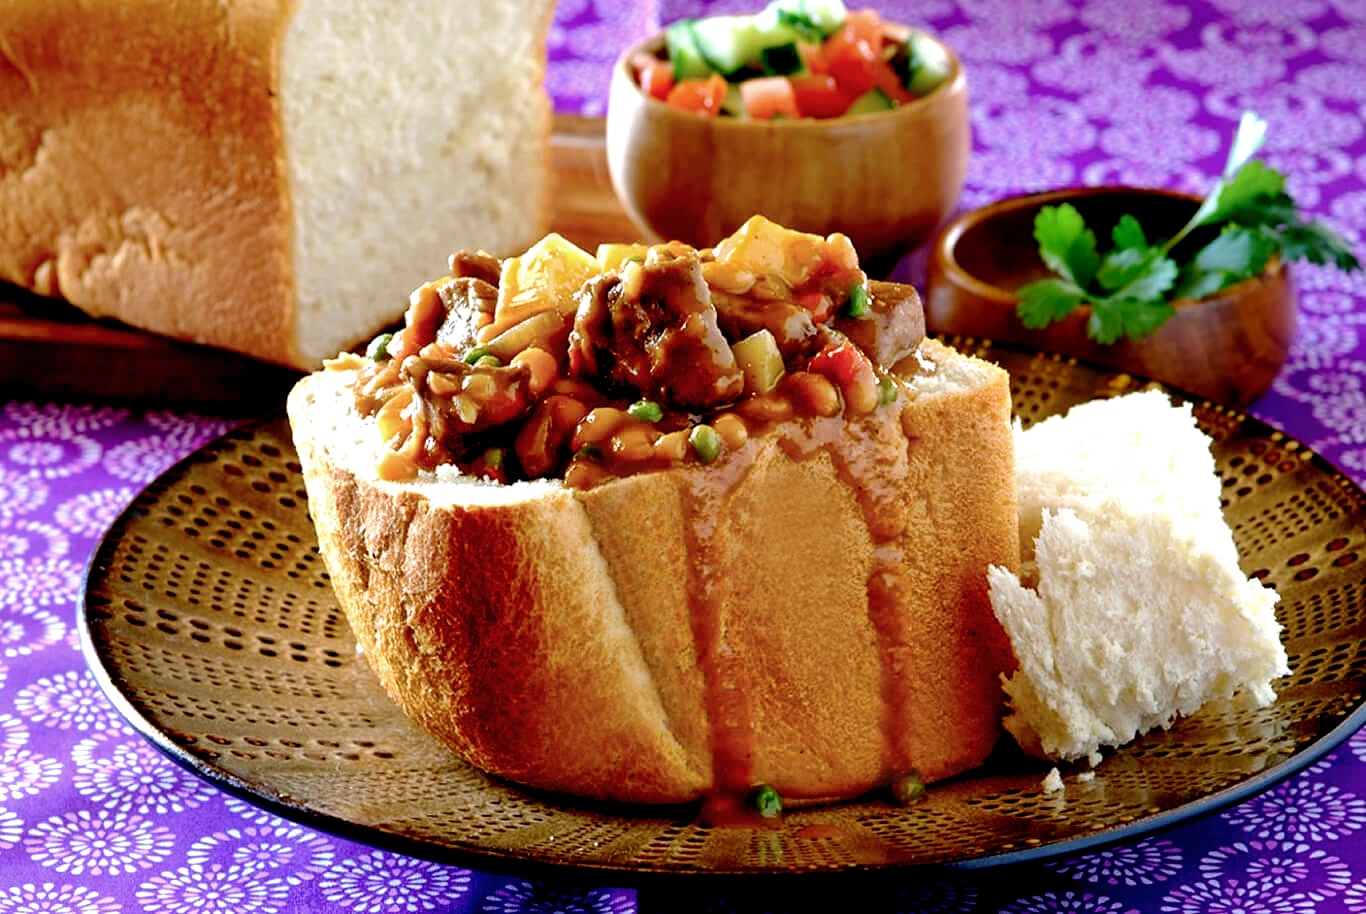 Beef and Vegetable Bunny Chow